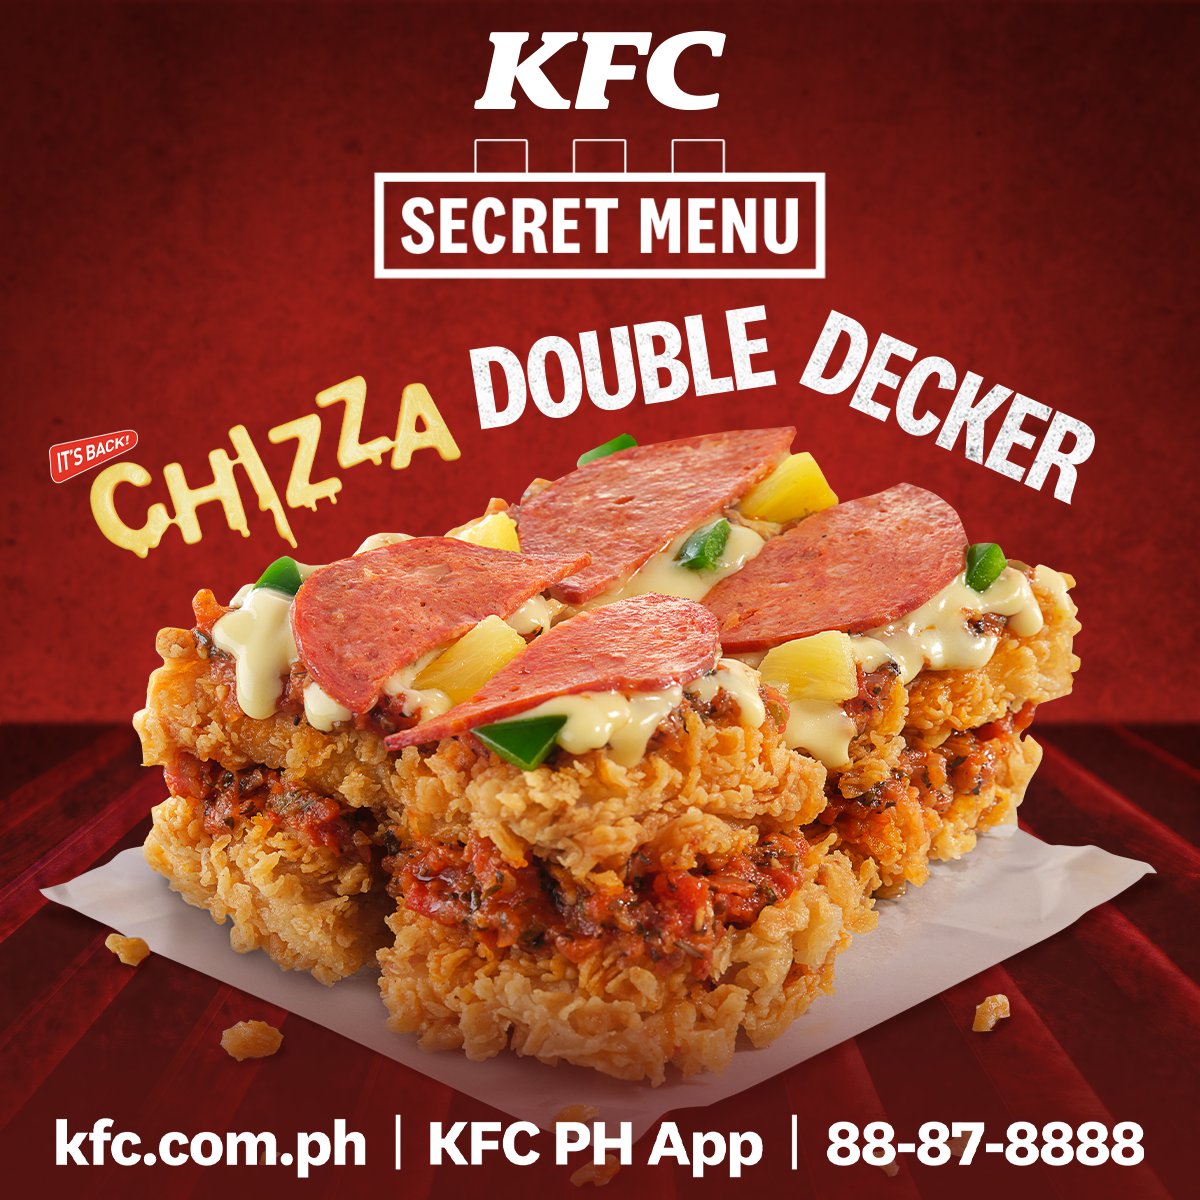 The rumors are true! Dive into the finger lickin’ good secret with our KFC Chizza Double Decker, exclusively available on our Secret Menu. 🤫🍗🍕 #YasssKFCChizza